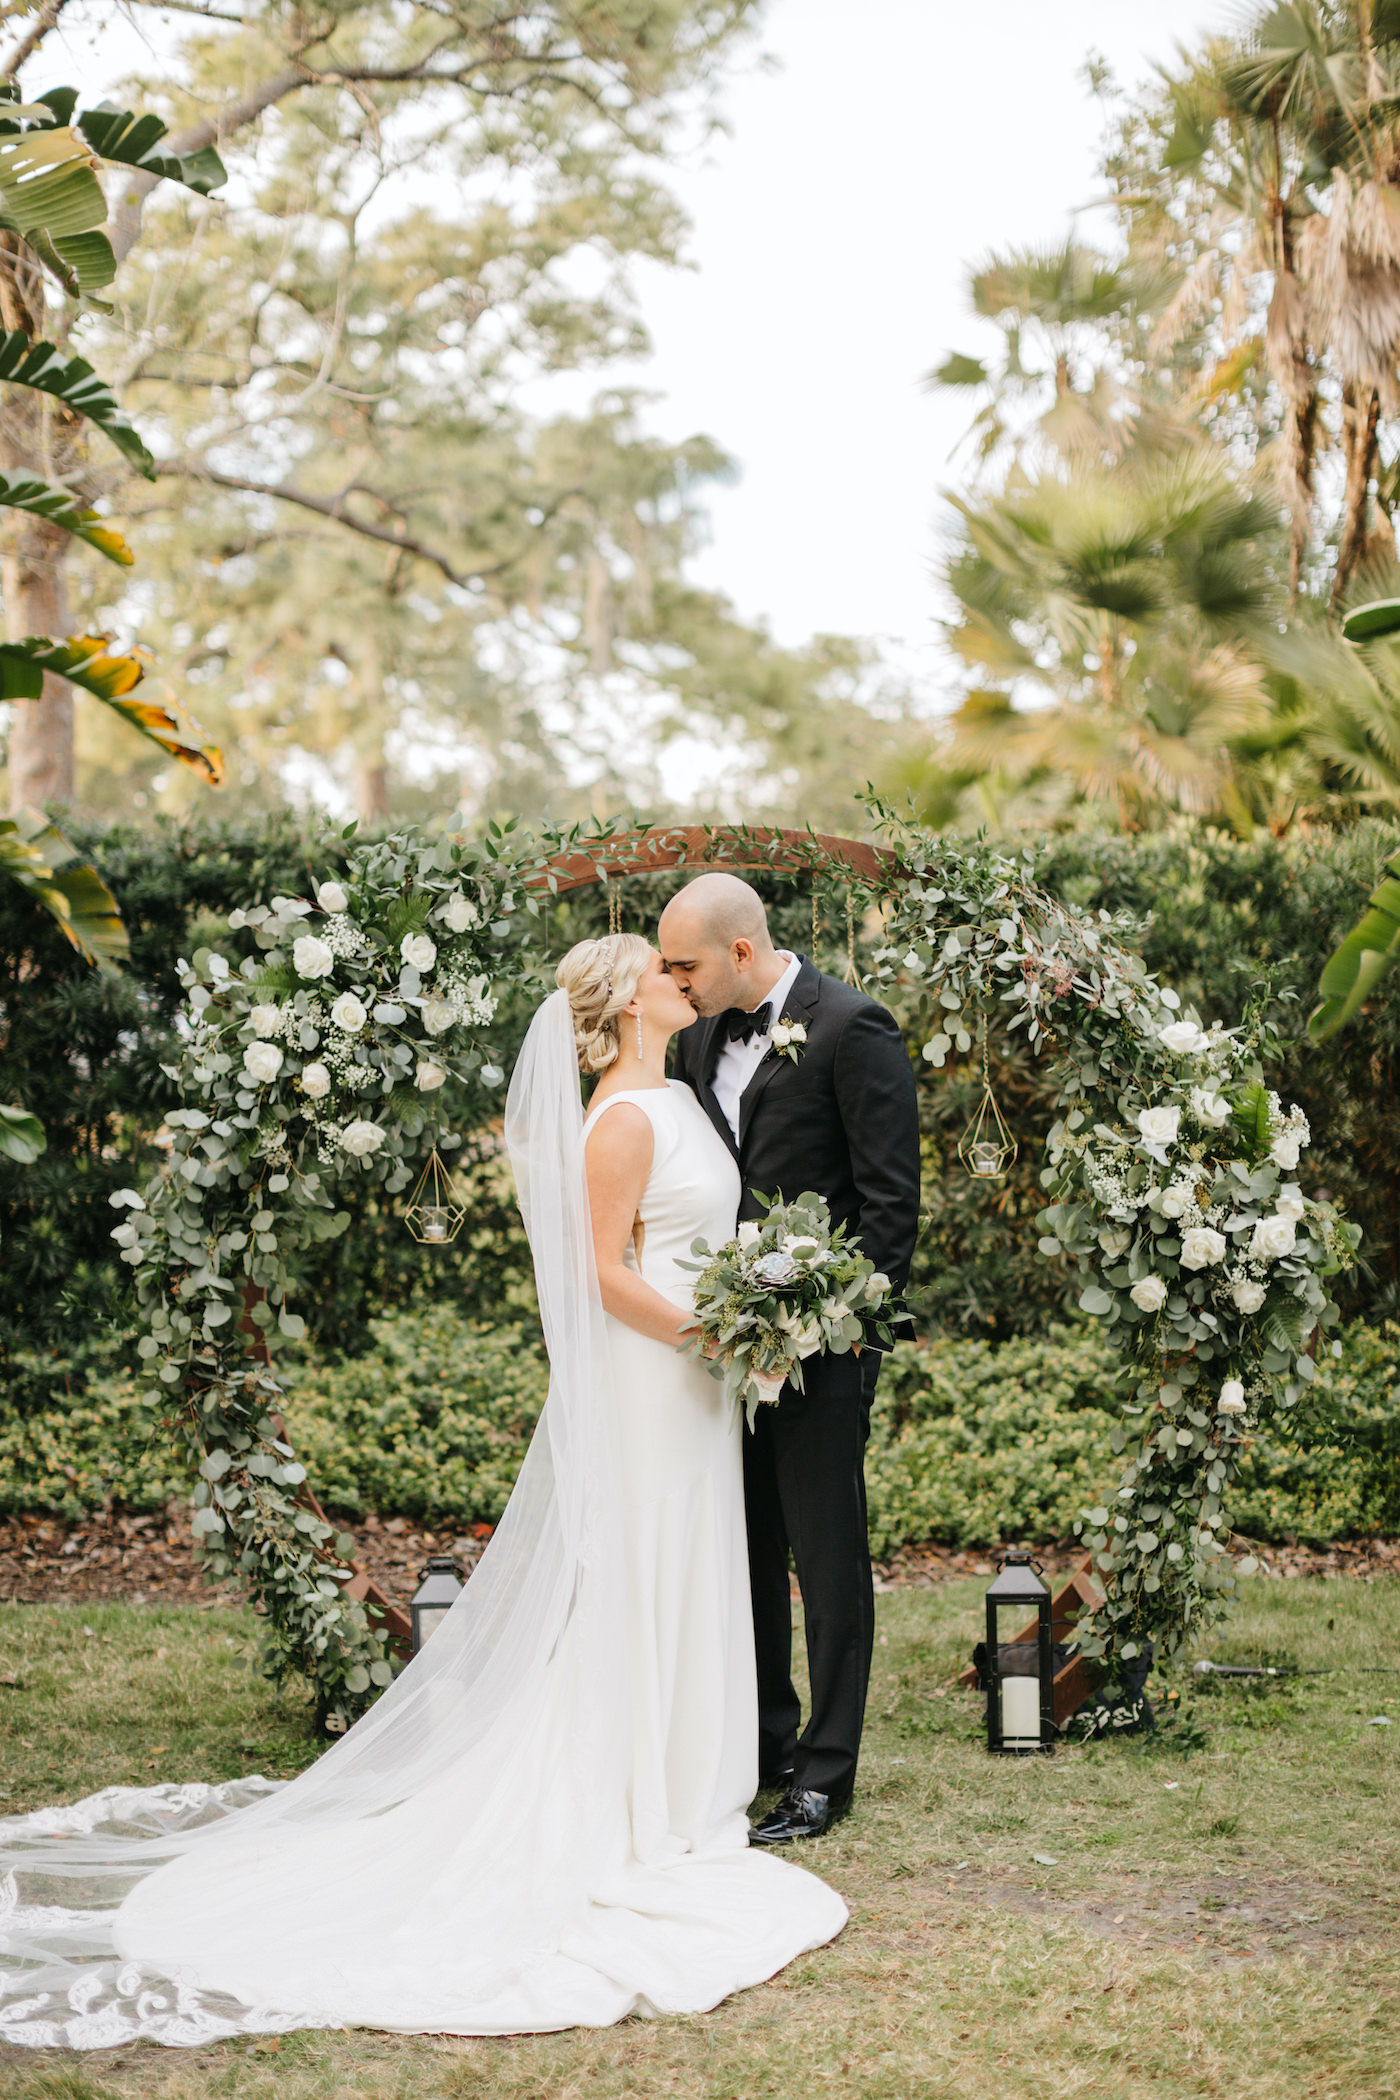 Bride and Groom Outdoor Portrait | Simple Sheath Ivory Crepe Bateau Neck Bridal Gown by Theia | Groom in Classic Black Tux Suit with Bow Tie | Natural Loose Greenery Bridal Bouquet with Eucalyptus and Succulents and White Roses | Boho Chic Outdoor Tampa Wedding Ceremony | Round Wood Moon Arch Ceremony Backdrop with Suspended Geometric Candles and Eucalyptus Greenery Garland with White Rose Floral Arrangements